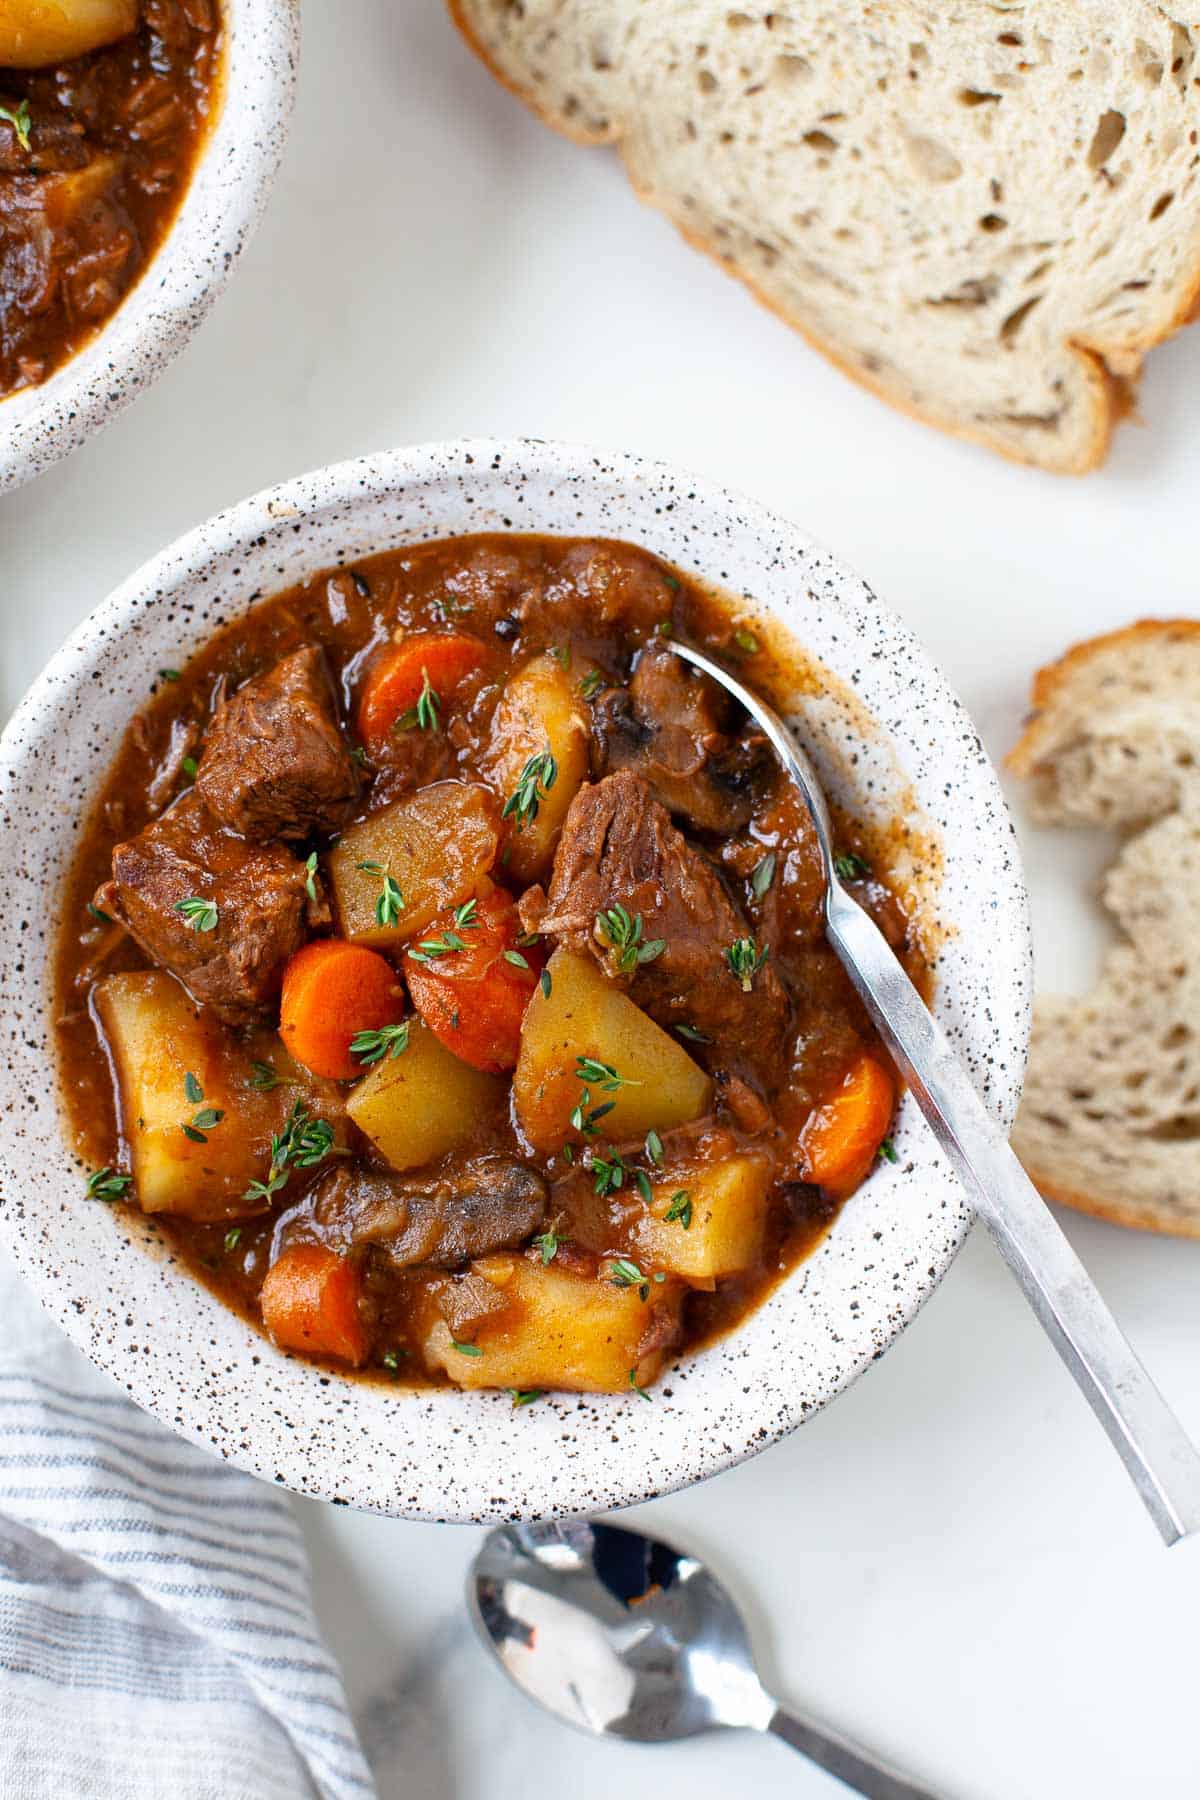 beef stew with potatoes and carrots in white speckled bowl with silver spoon, two slices bread.